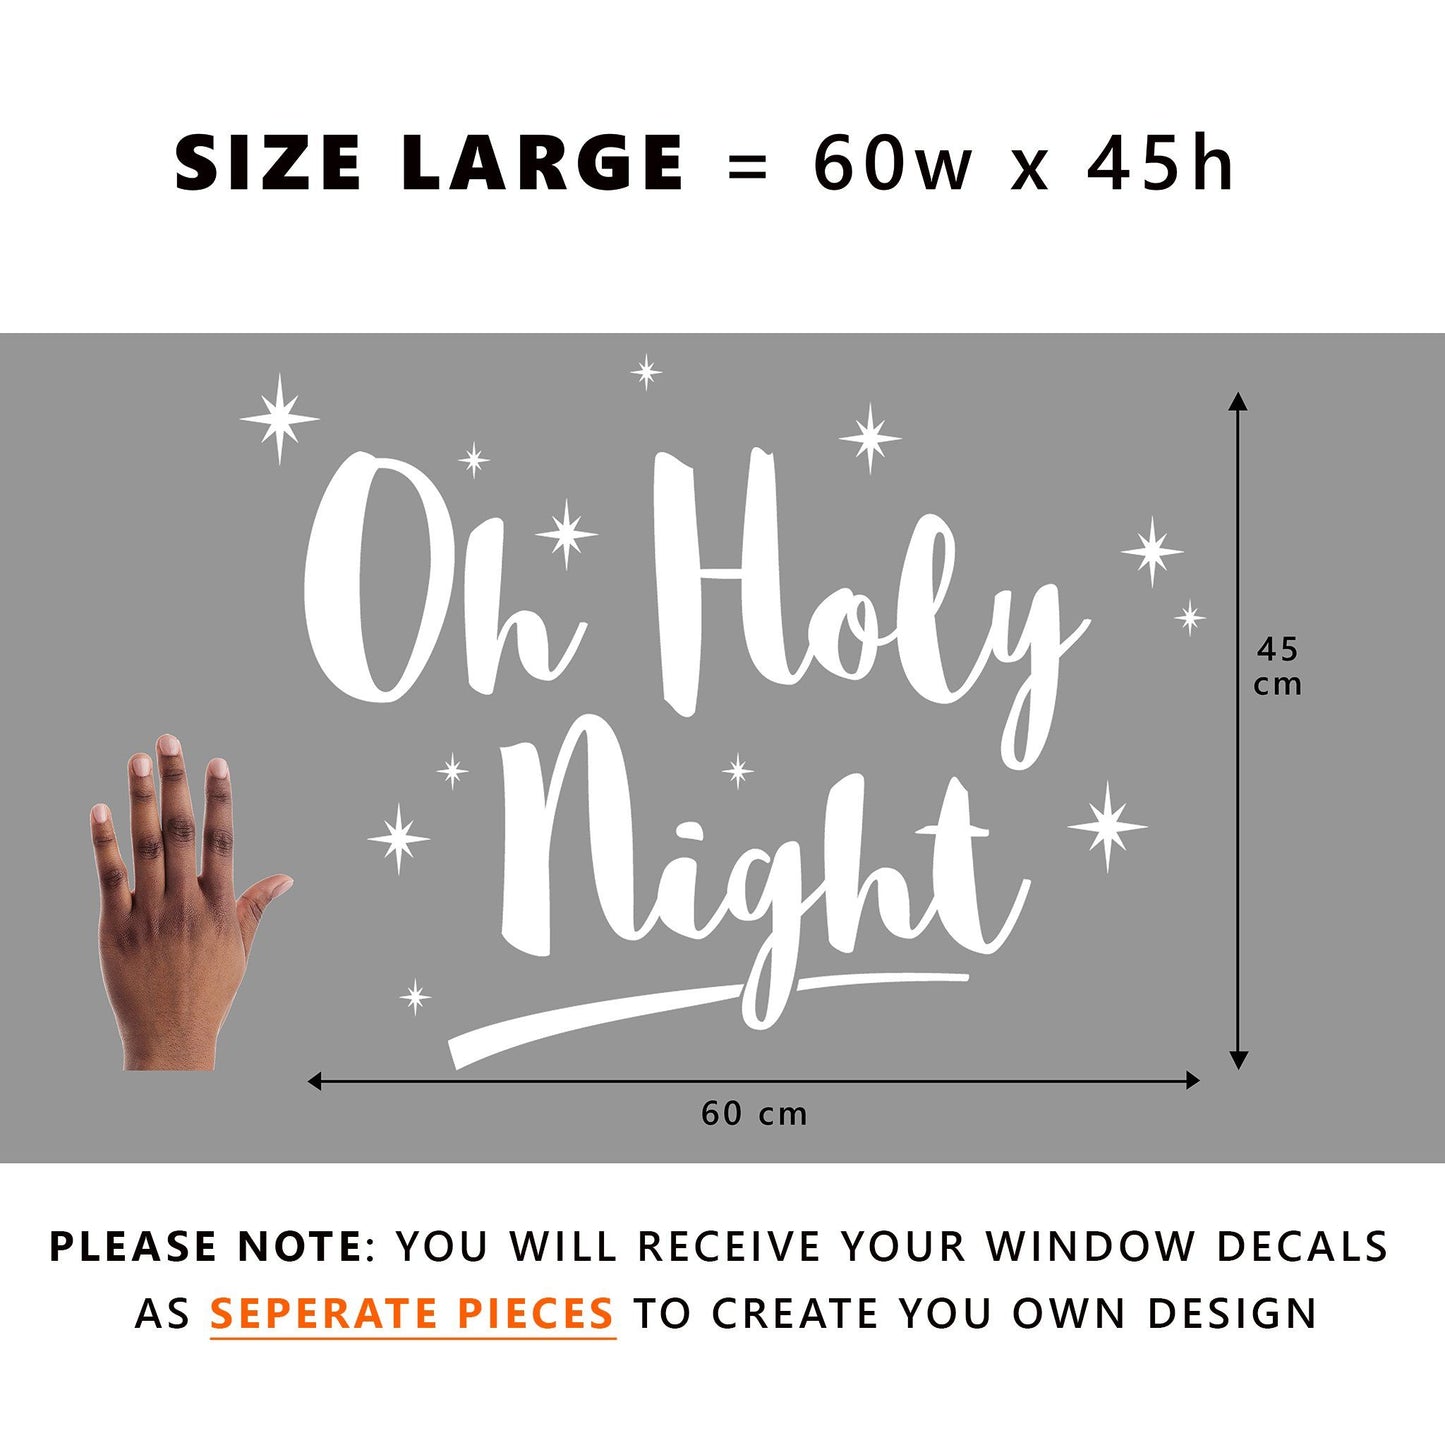 Decal Christmas Oh Holy Night Window Decal Dizzy Duck Designs